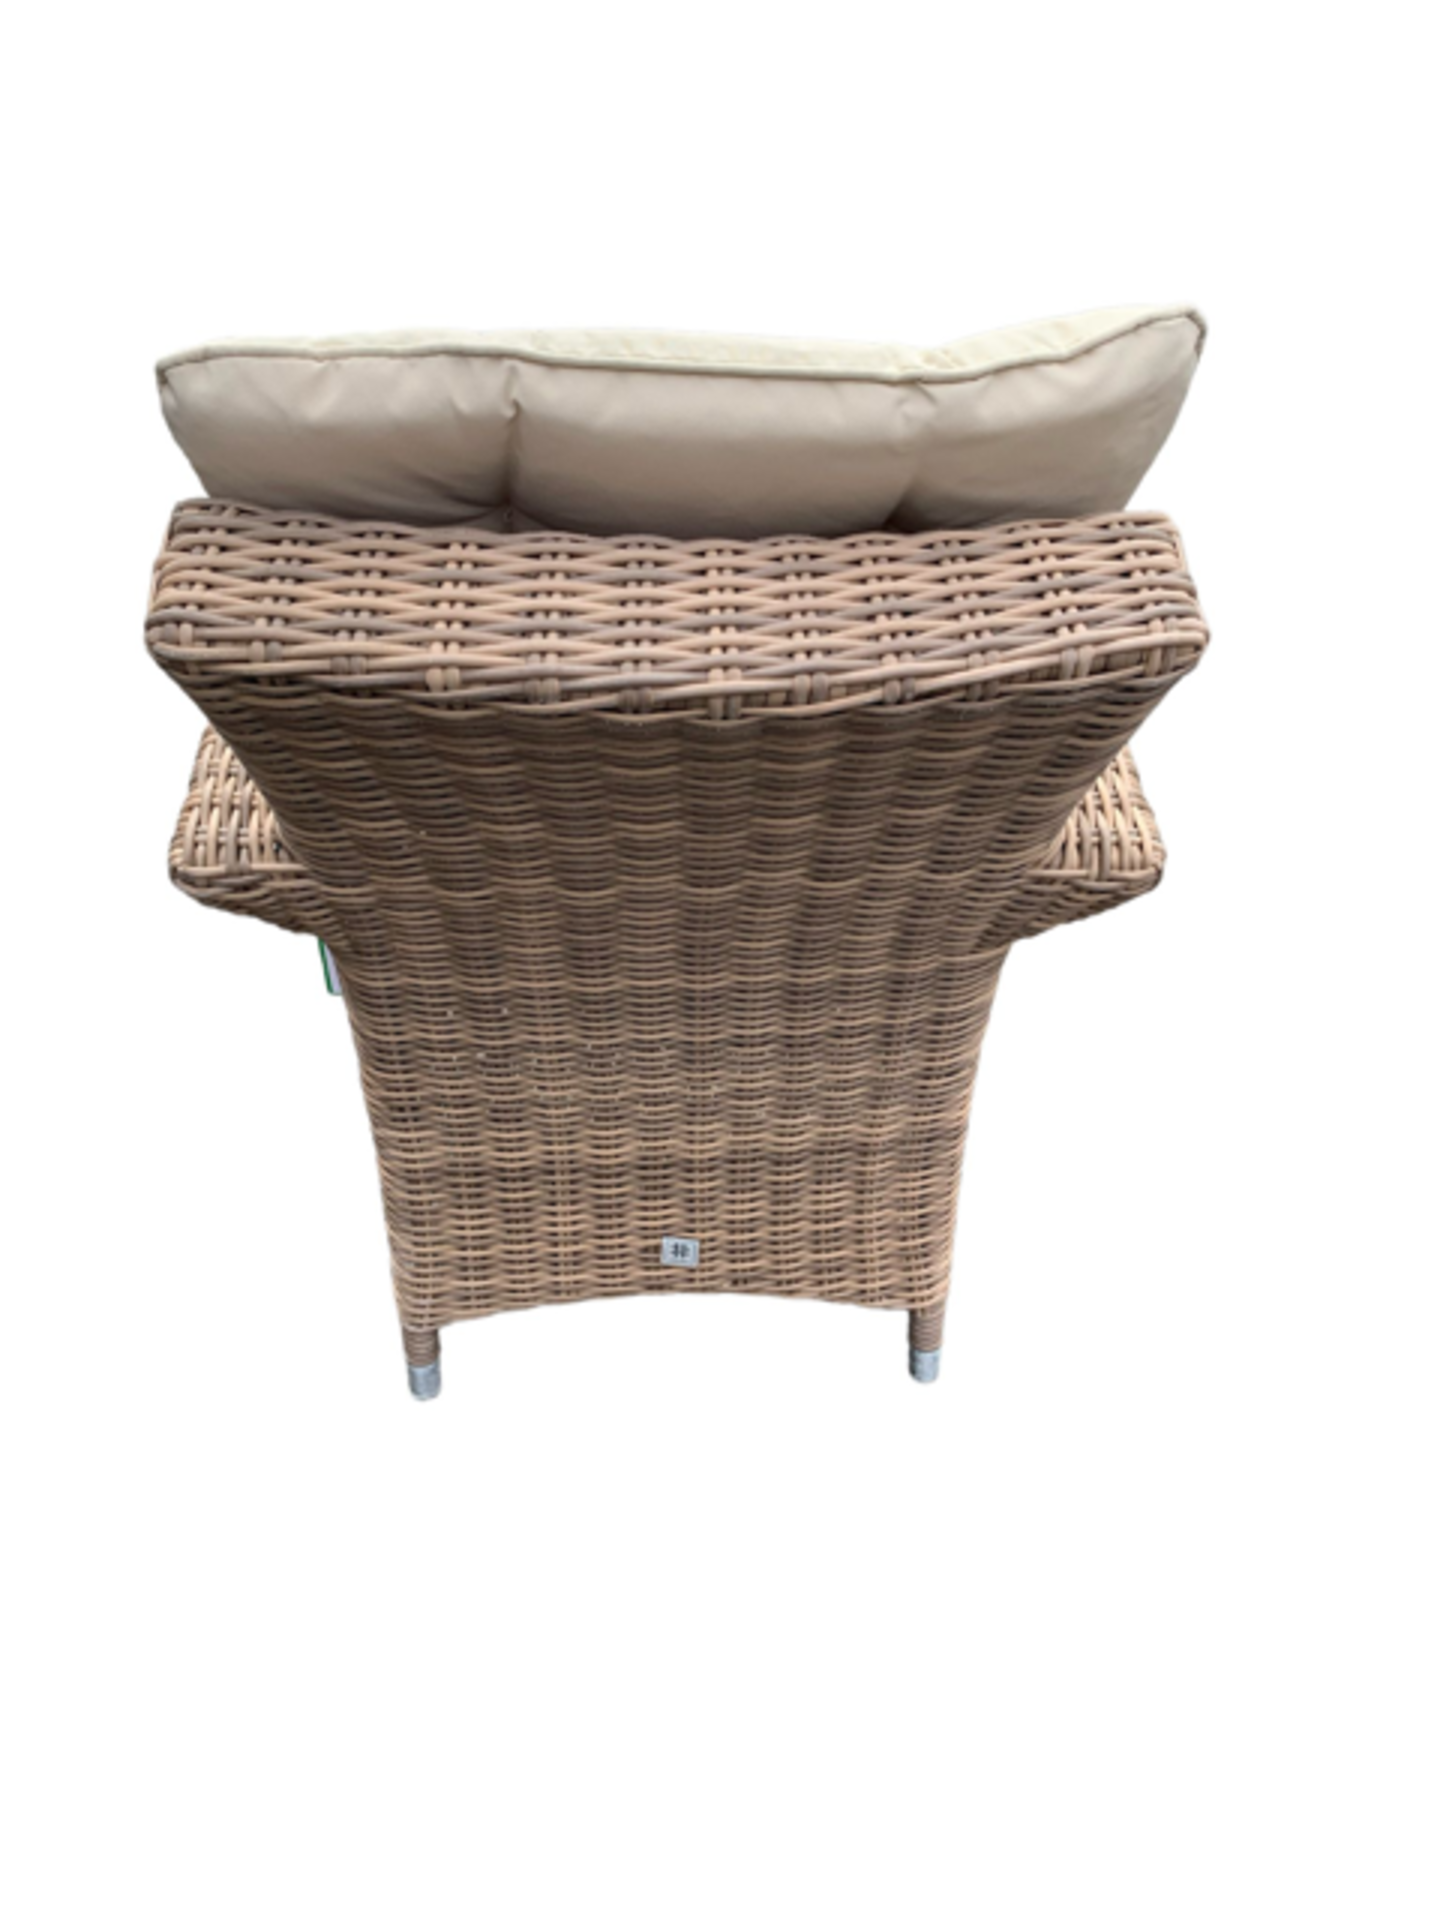 BRAND NEW 4 SEATER ROUND RATTAN DINING TABLE SET WITH ICE BUCKET AND WEATHER PROOF RAIN COVER. - Image 5 of 5